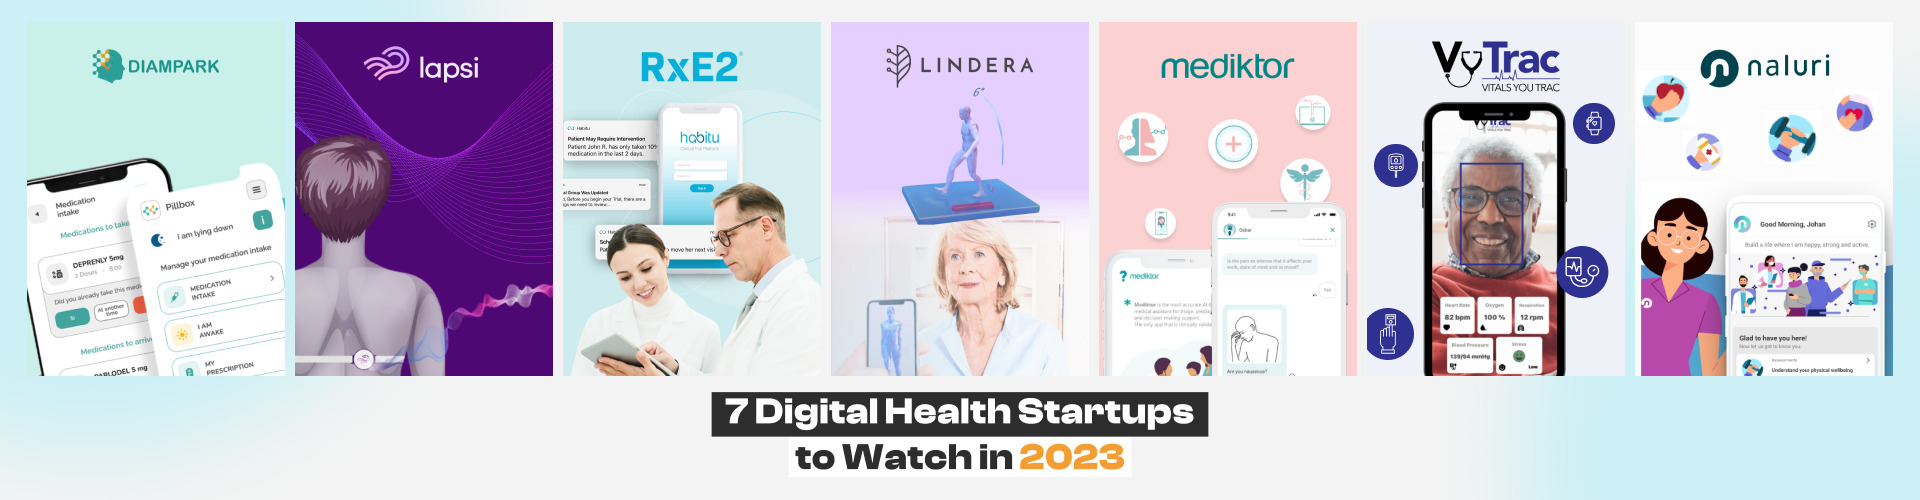 Top Digital Health Startups to Watch in 2023 - image